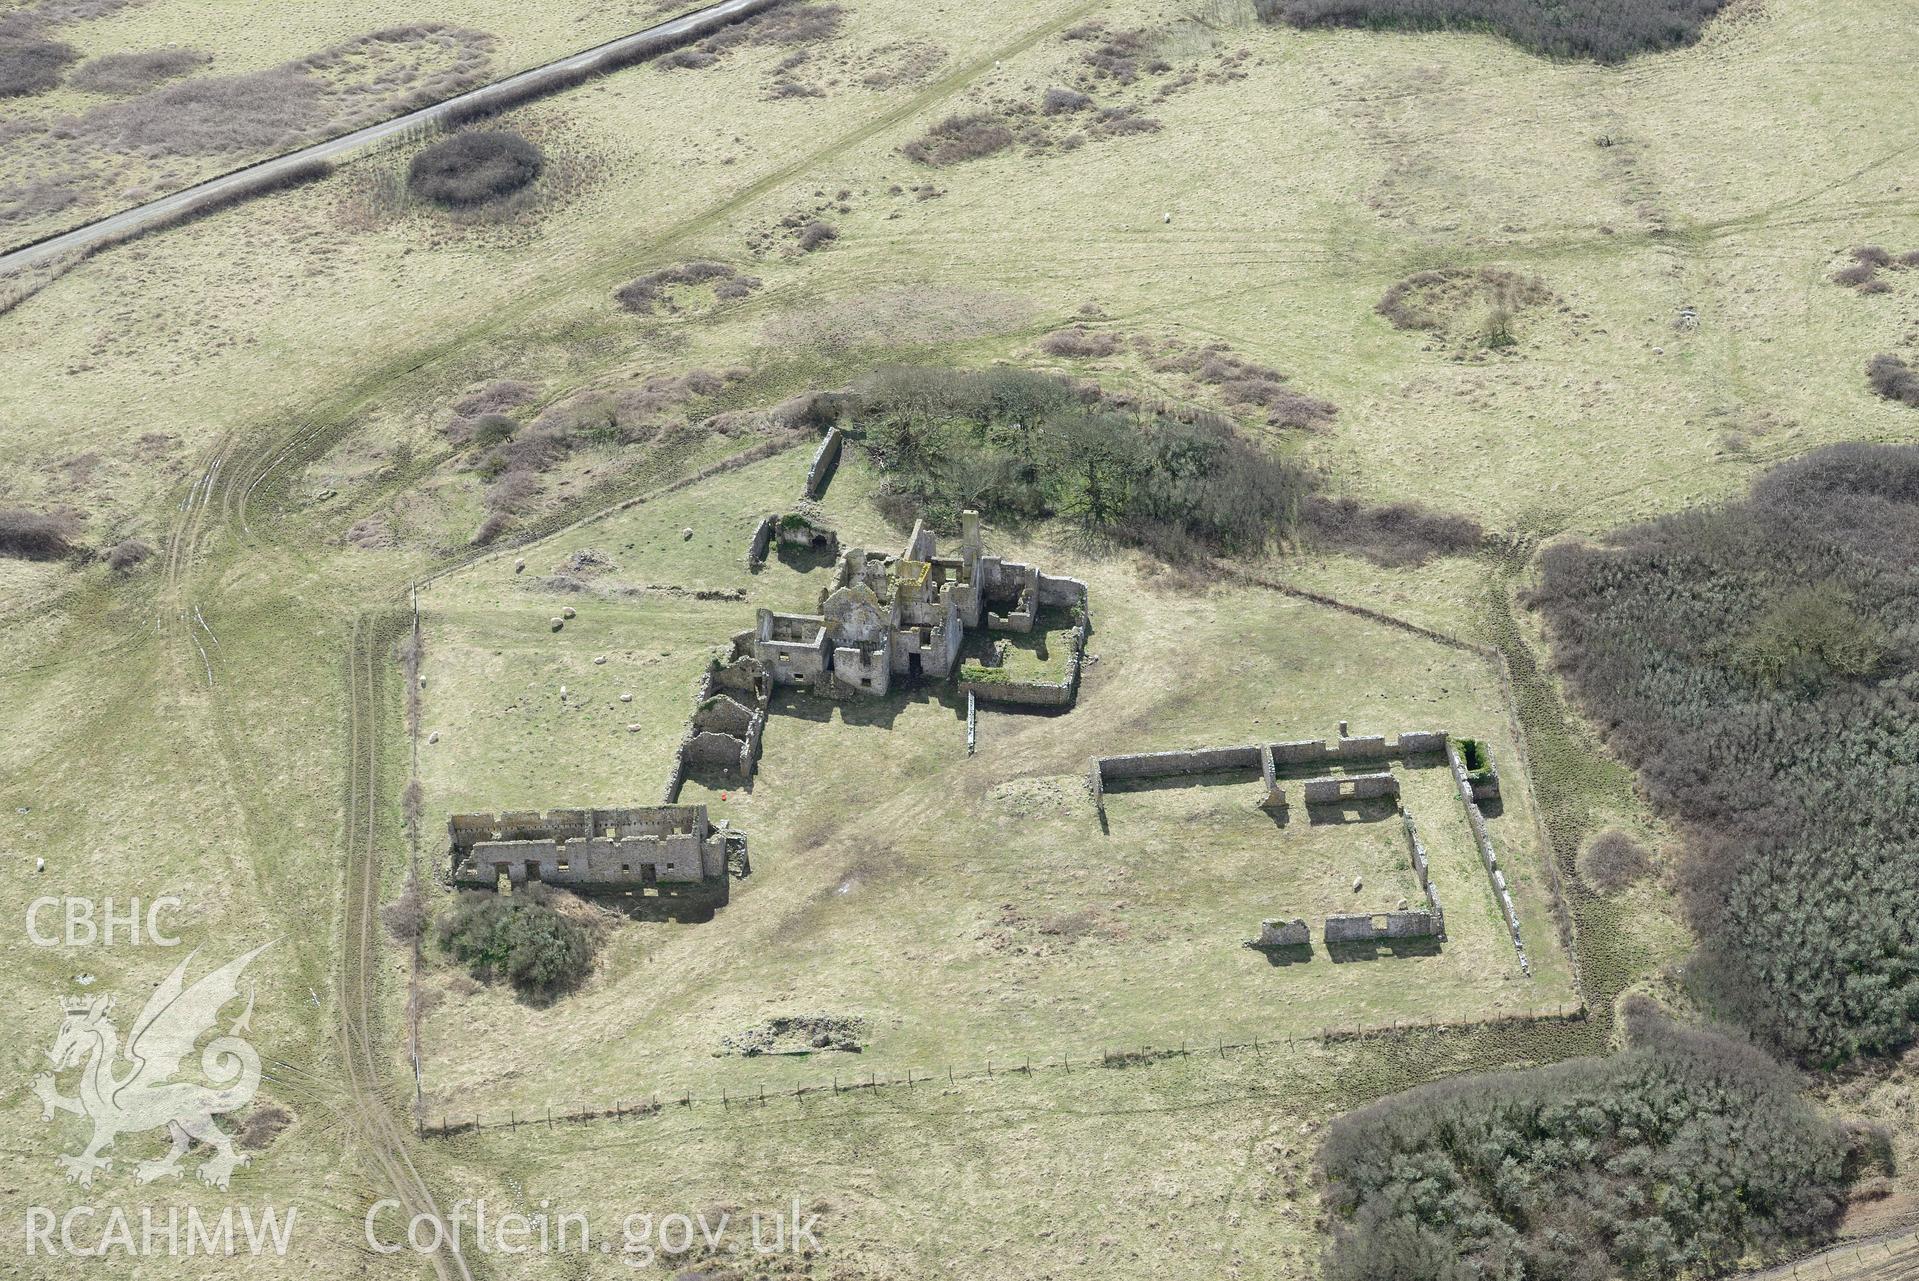 Pricaston Farmstead. Baseline aerial reconnaissance survey for the CHERISH Project. ? Crown: CHERISH PROJECT 2018. Produced with EU funds through the Ireland Wales Co-operation Programme 2014-2020. All material made freely available through the Open Government Licence.